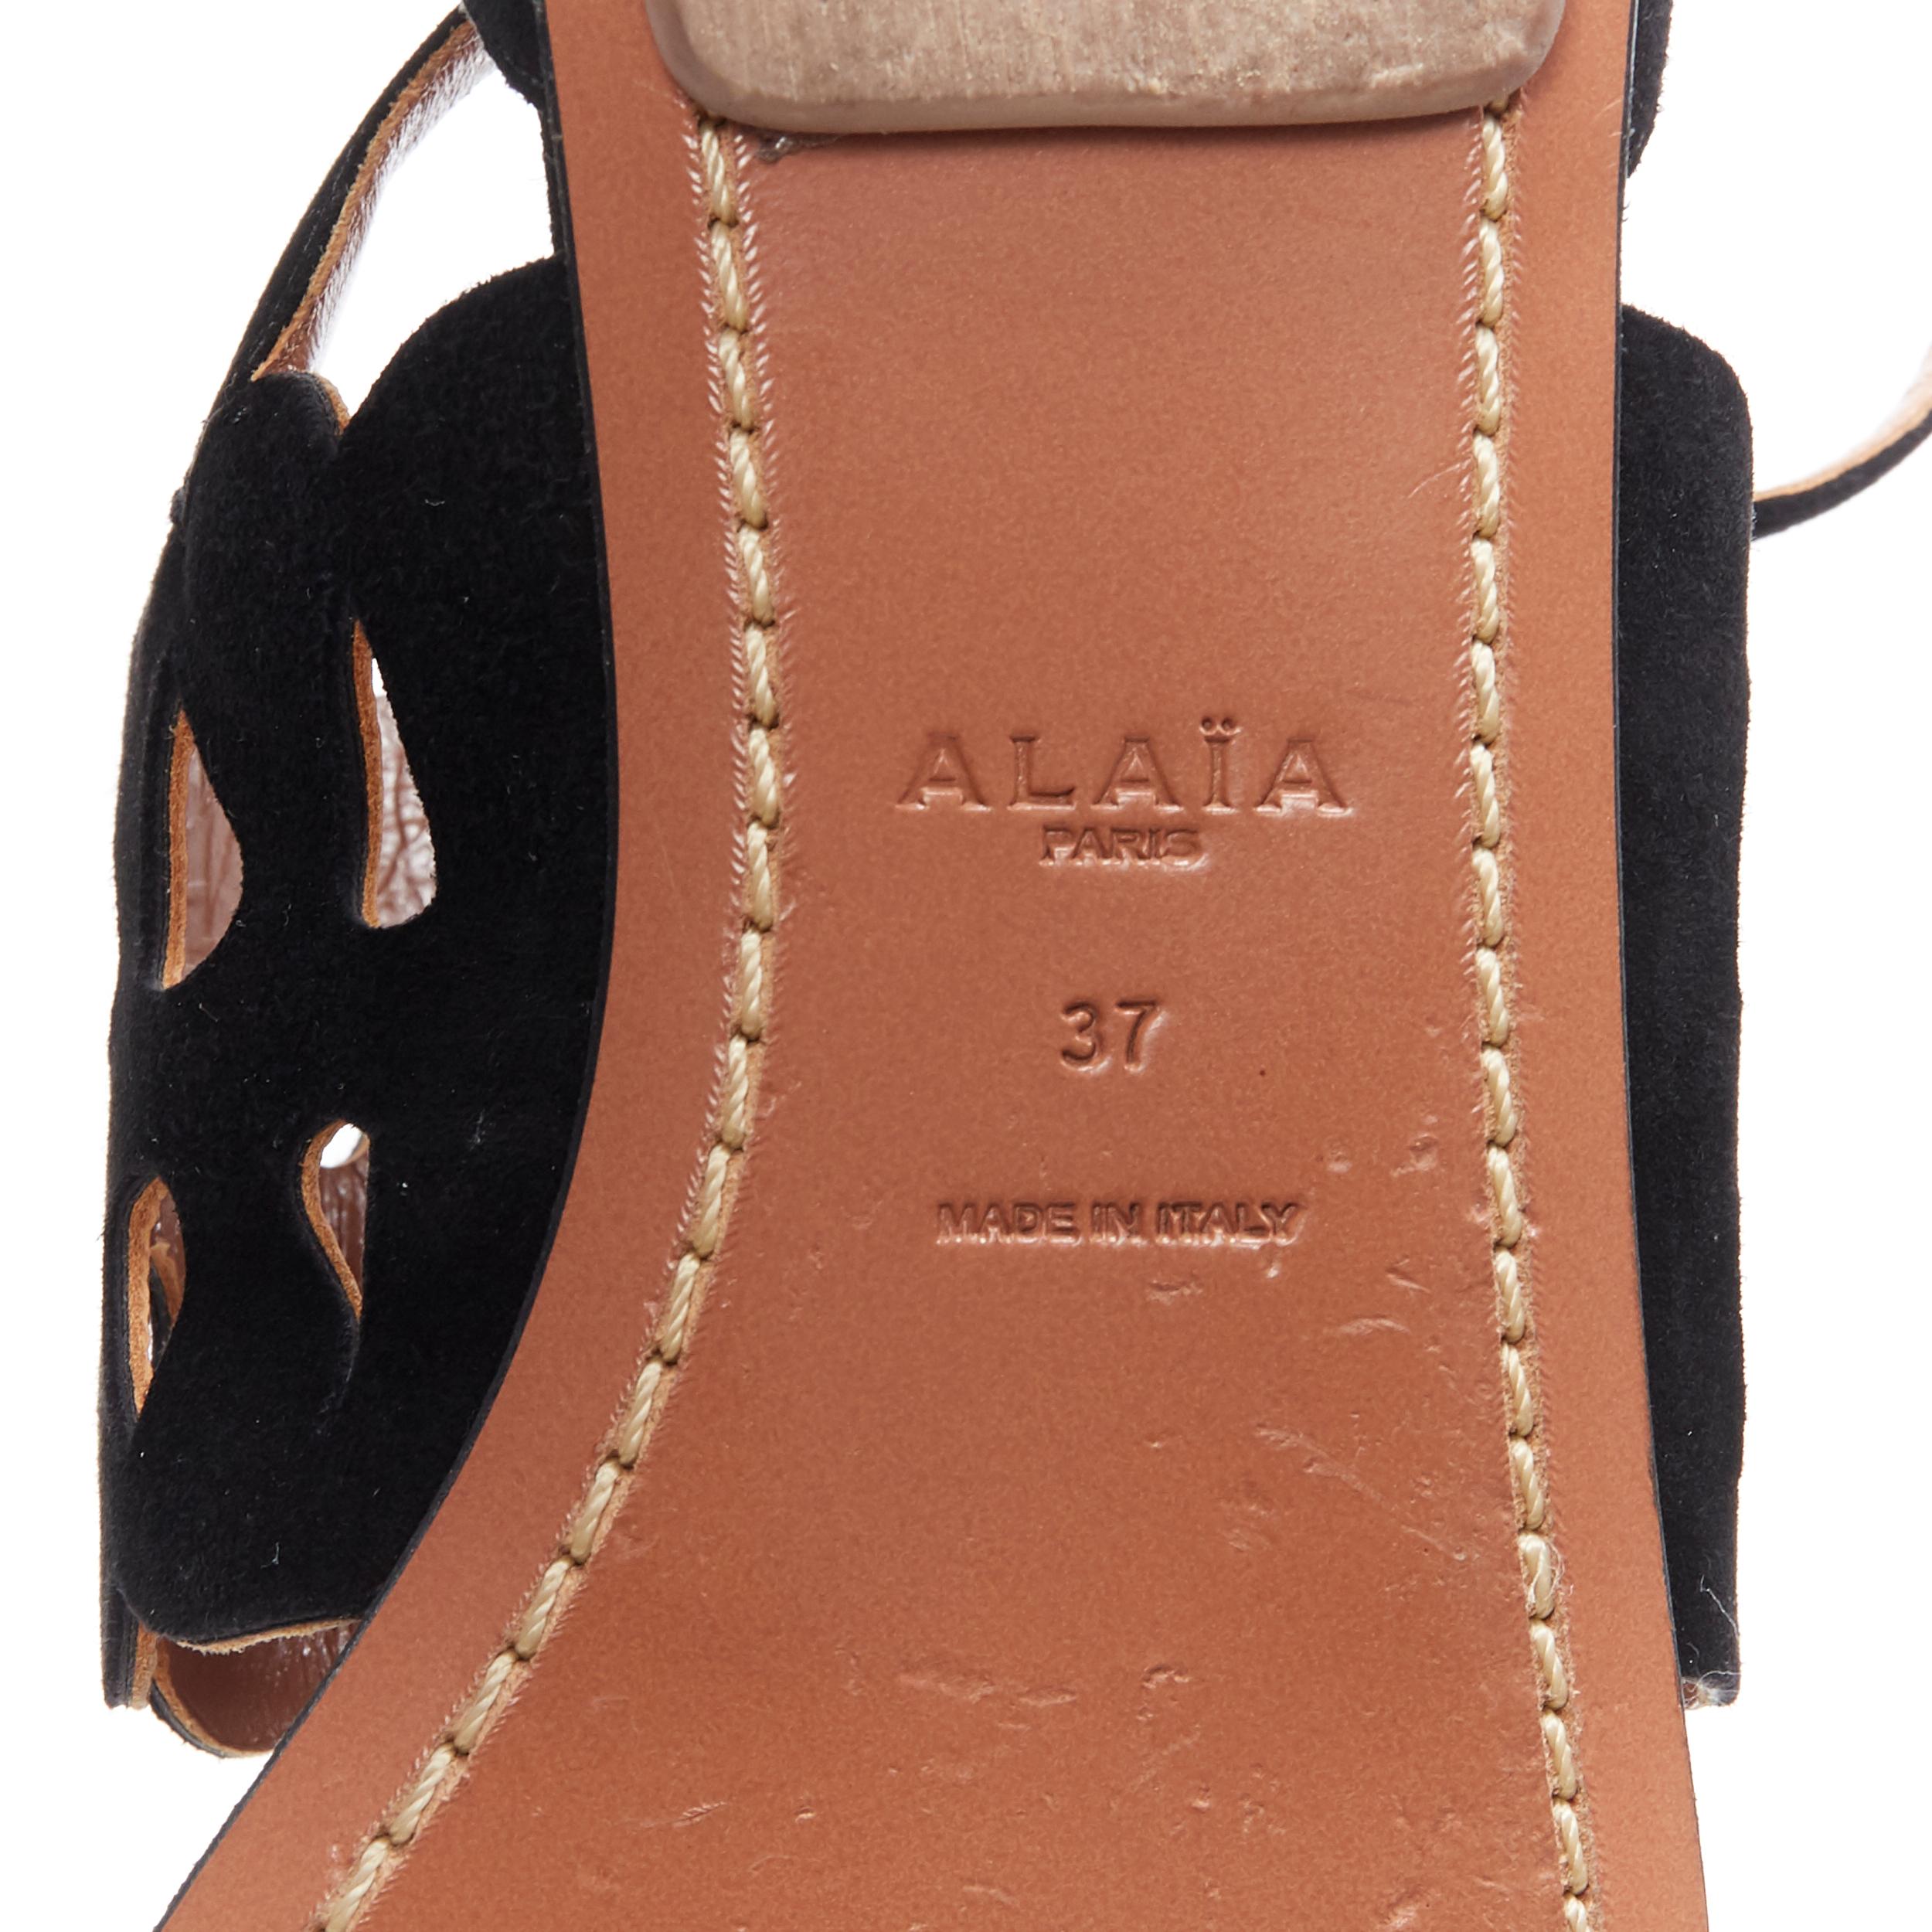 ALAIA black suede squiggly cut out strap open toe ankle wrap flat sandals EU37 3